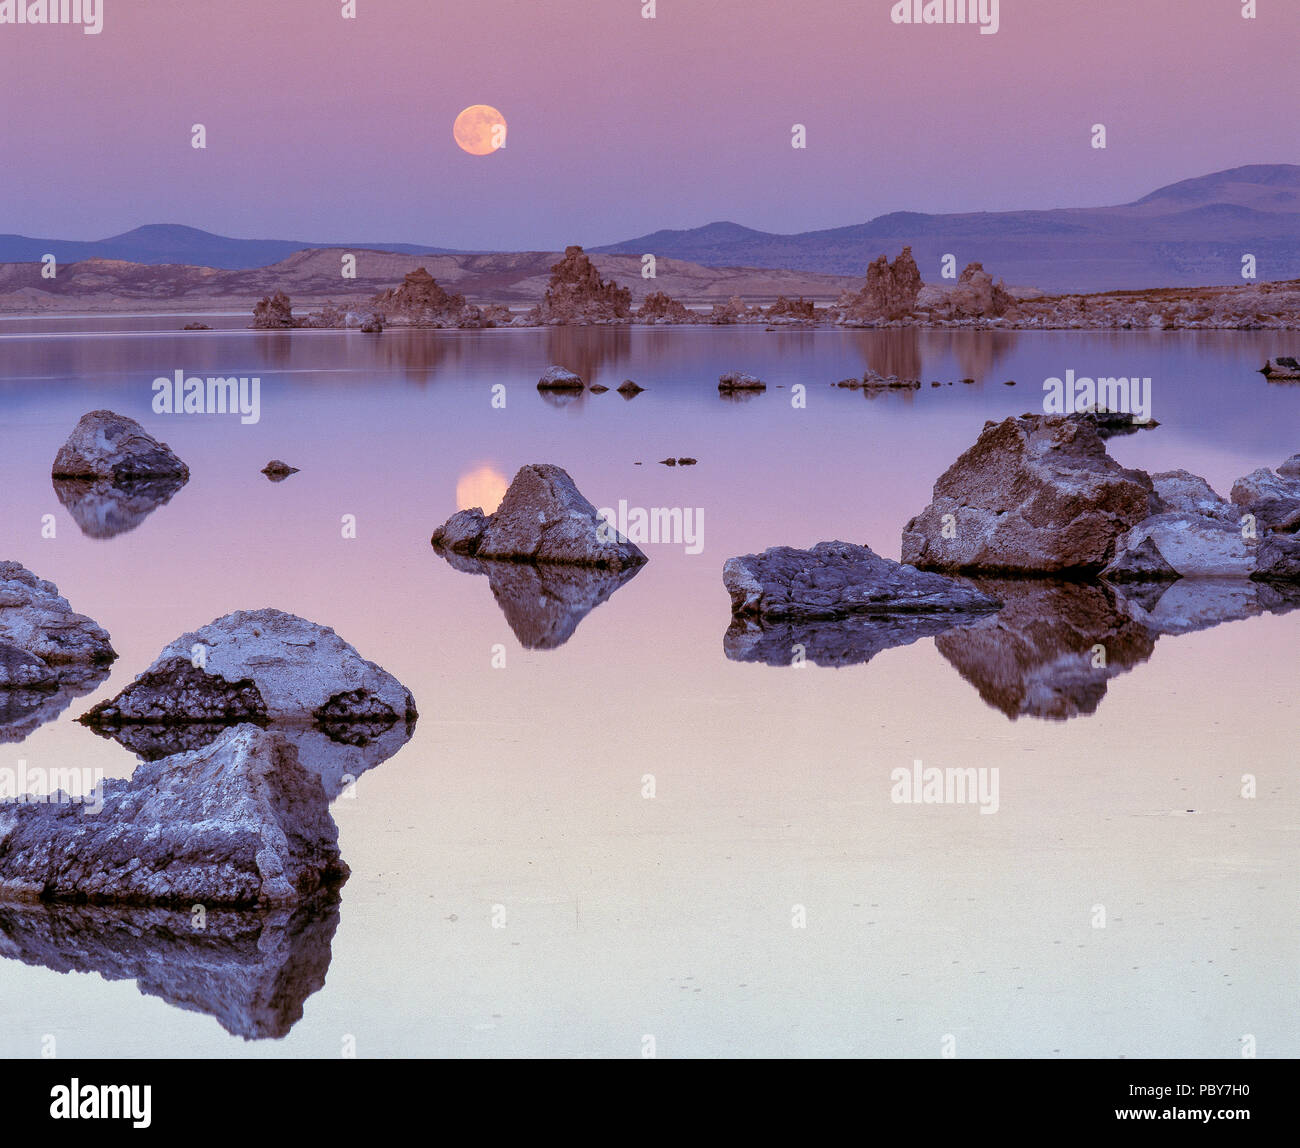 Moonrise, lac Mono, Mono Basin National Forest Scenic Area, Inyo National Forest, Californie Banque D'Images